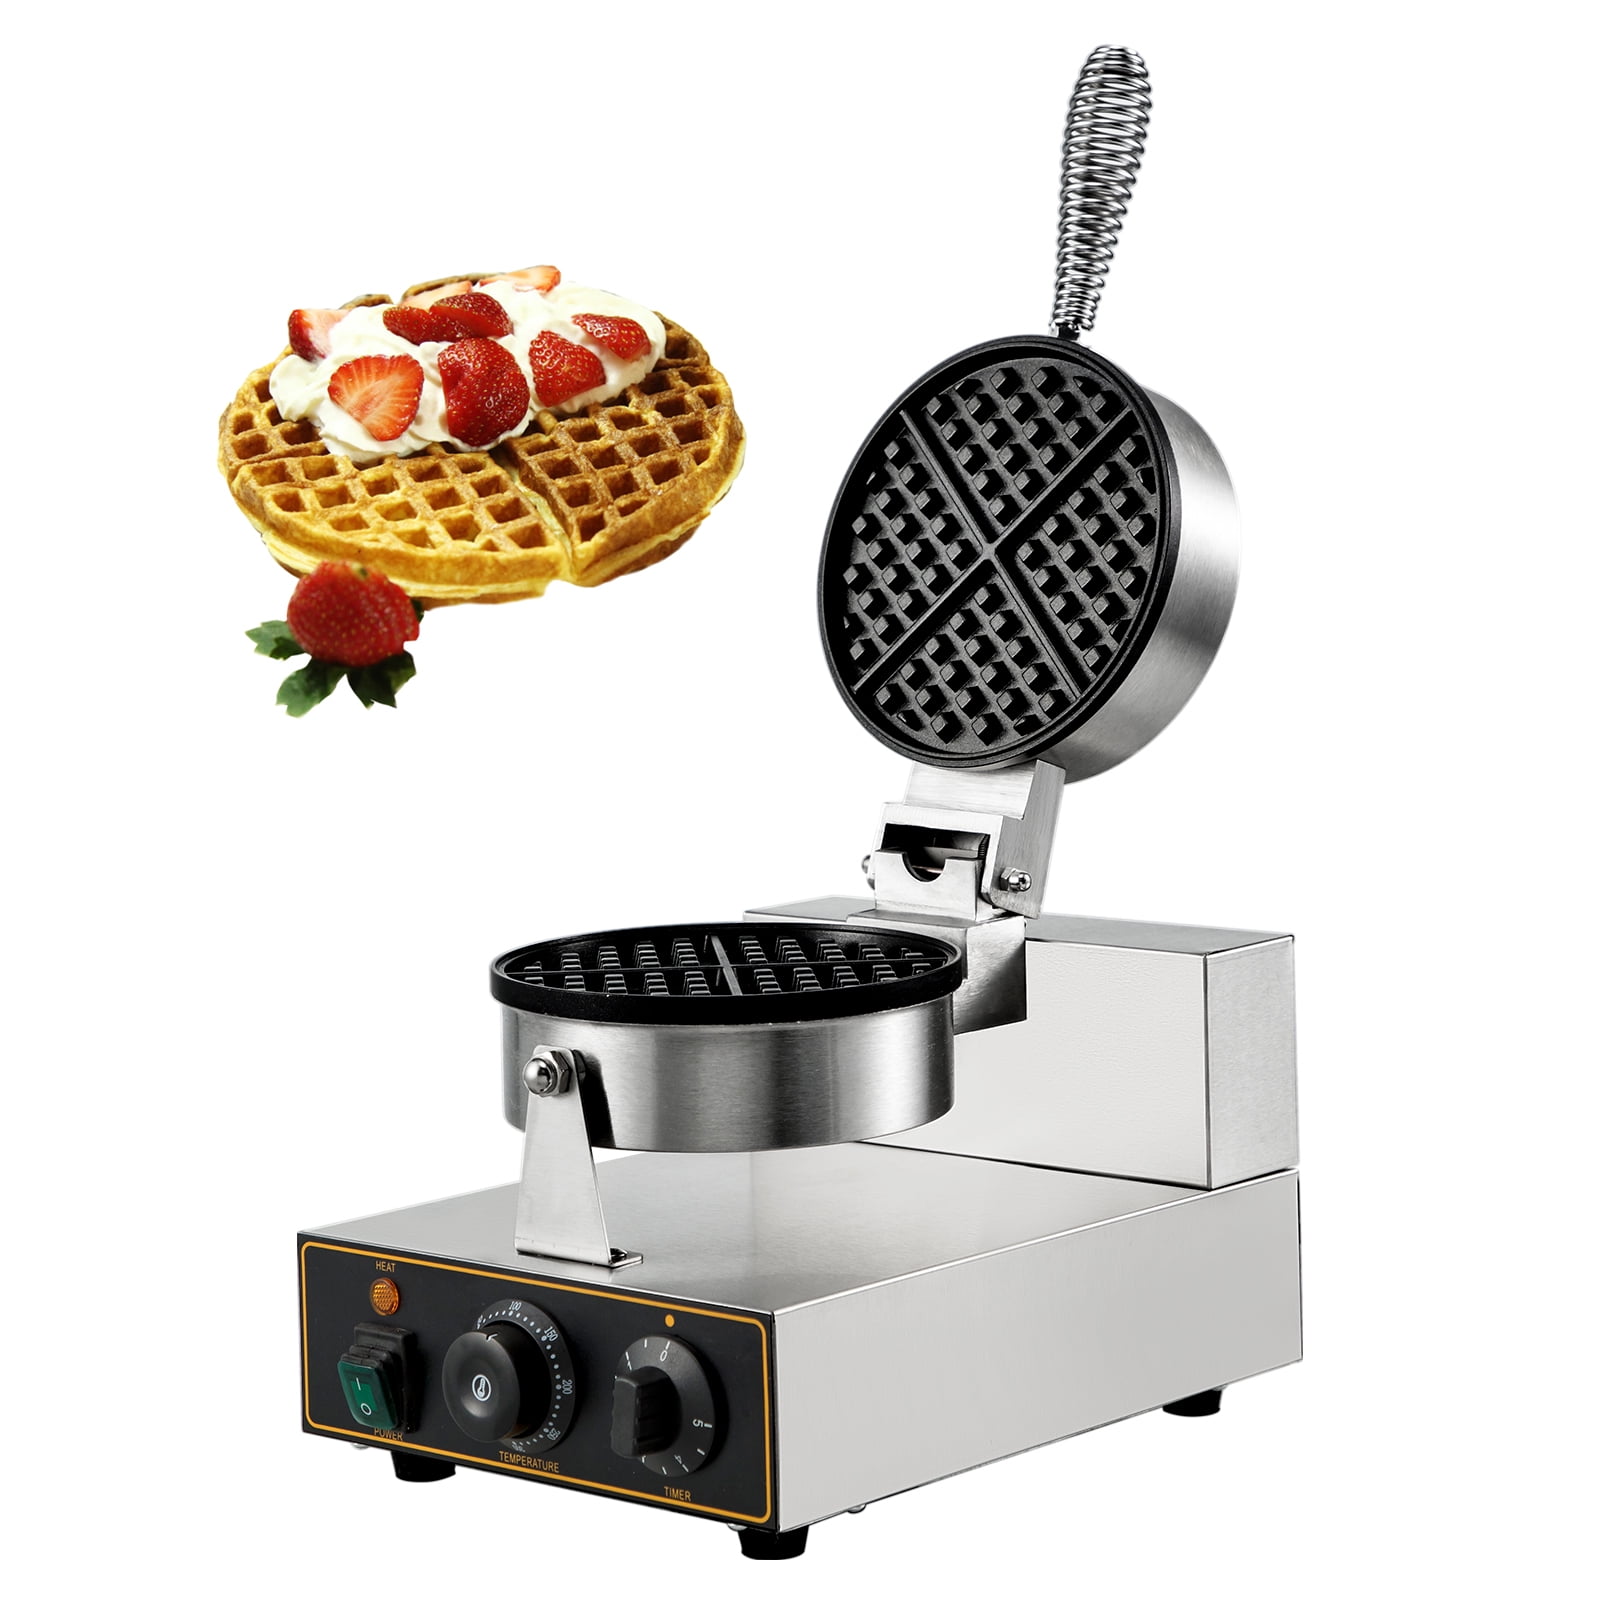 VEVOR 110V Commercial Waffle Maker 4 Pcs Non-Stick 1750W Electric Christmas Tree Waffle Machine Stainless Steel Professional Cooking Equipment